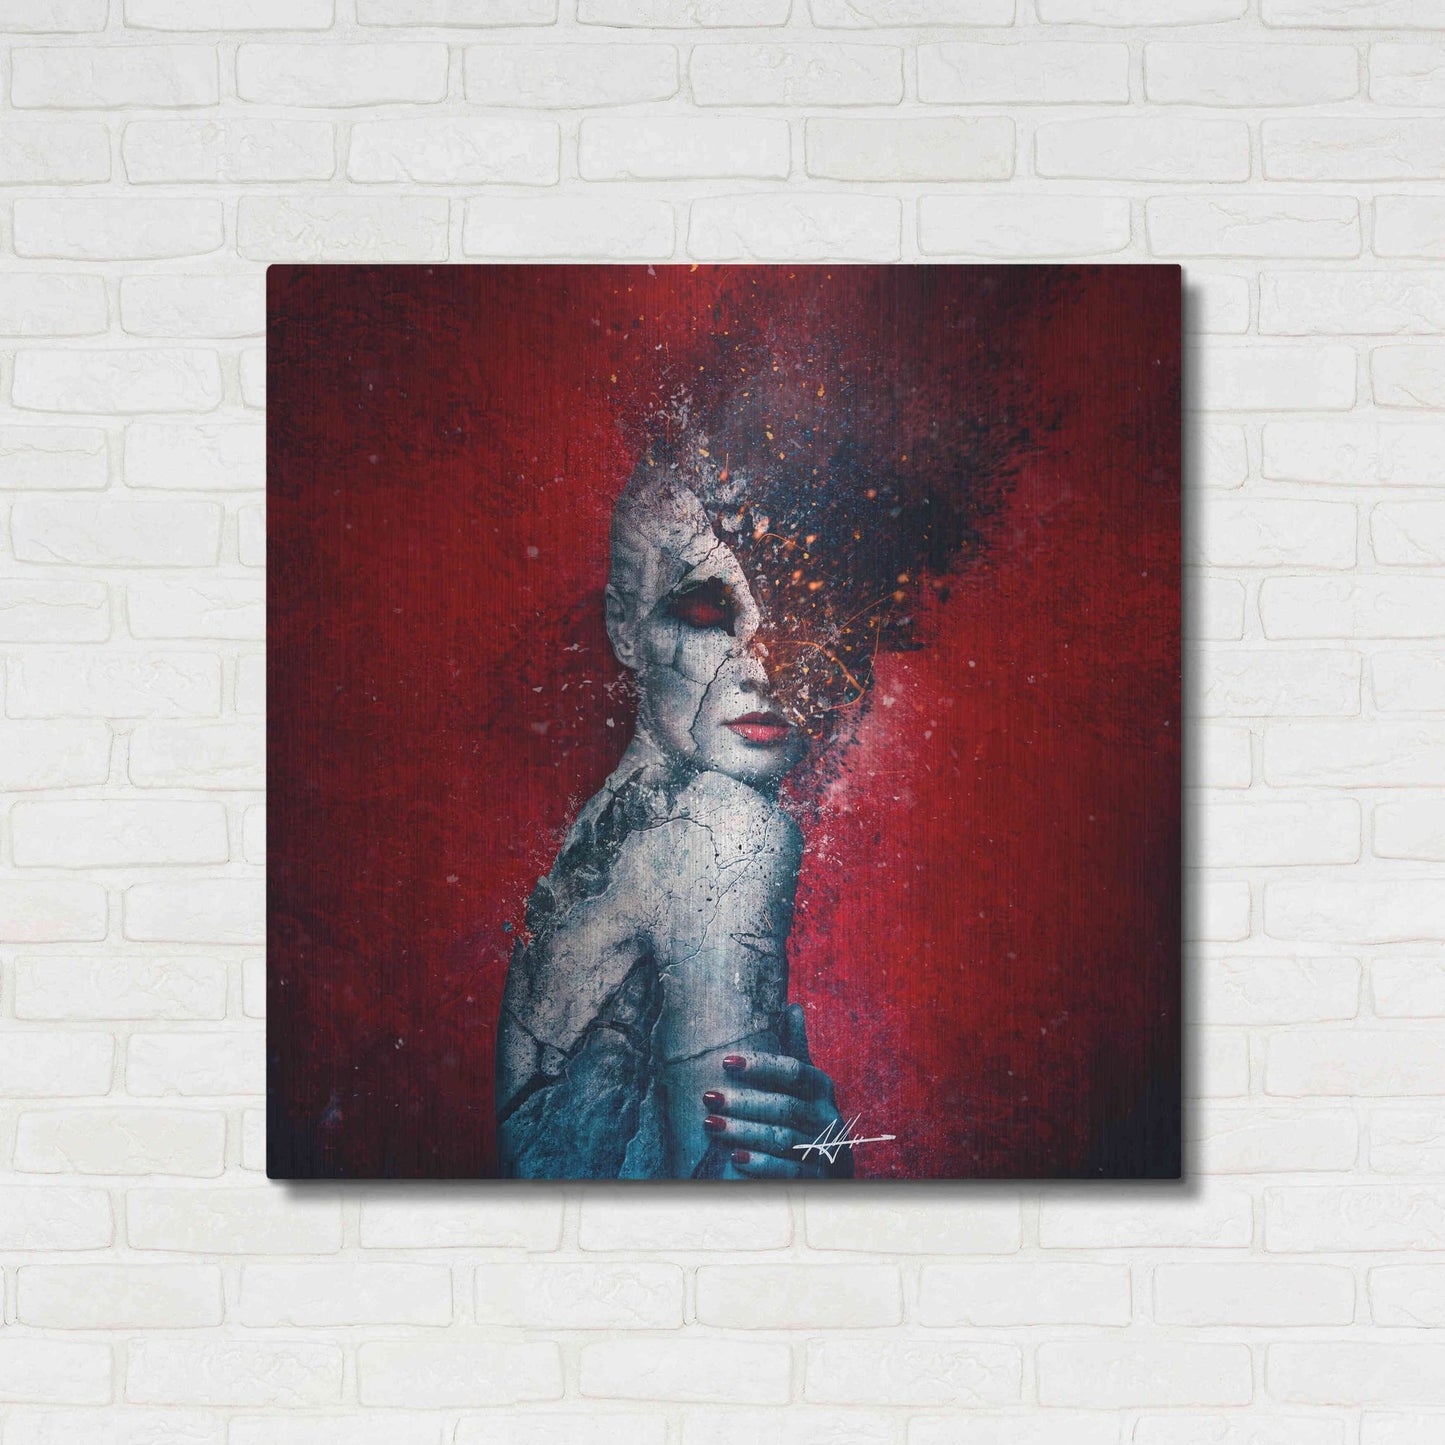 Luxe Metal Art 'Indifference' by Mario Sanchez Nevado, Metal Wall Art,36x36